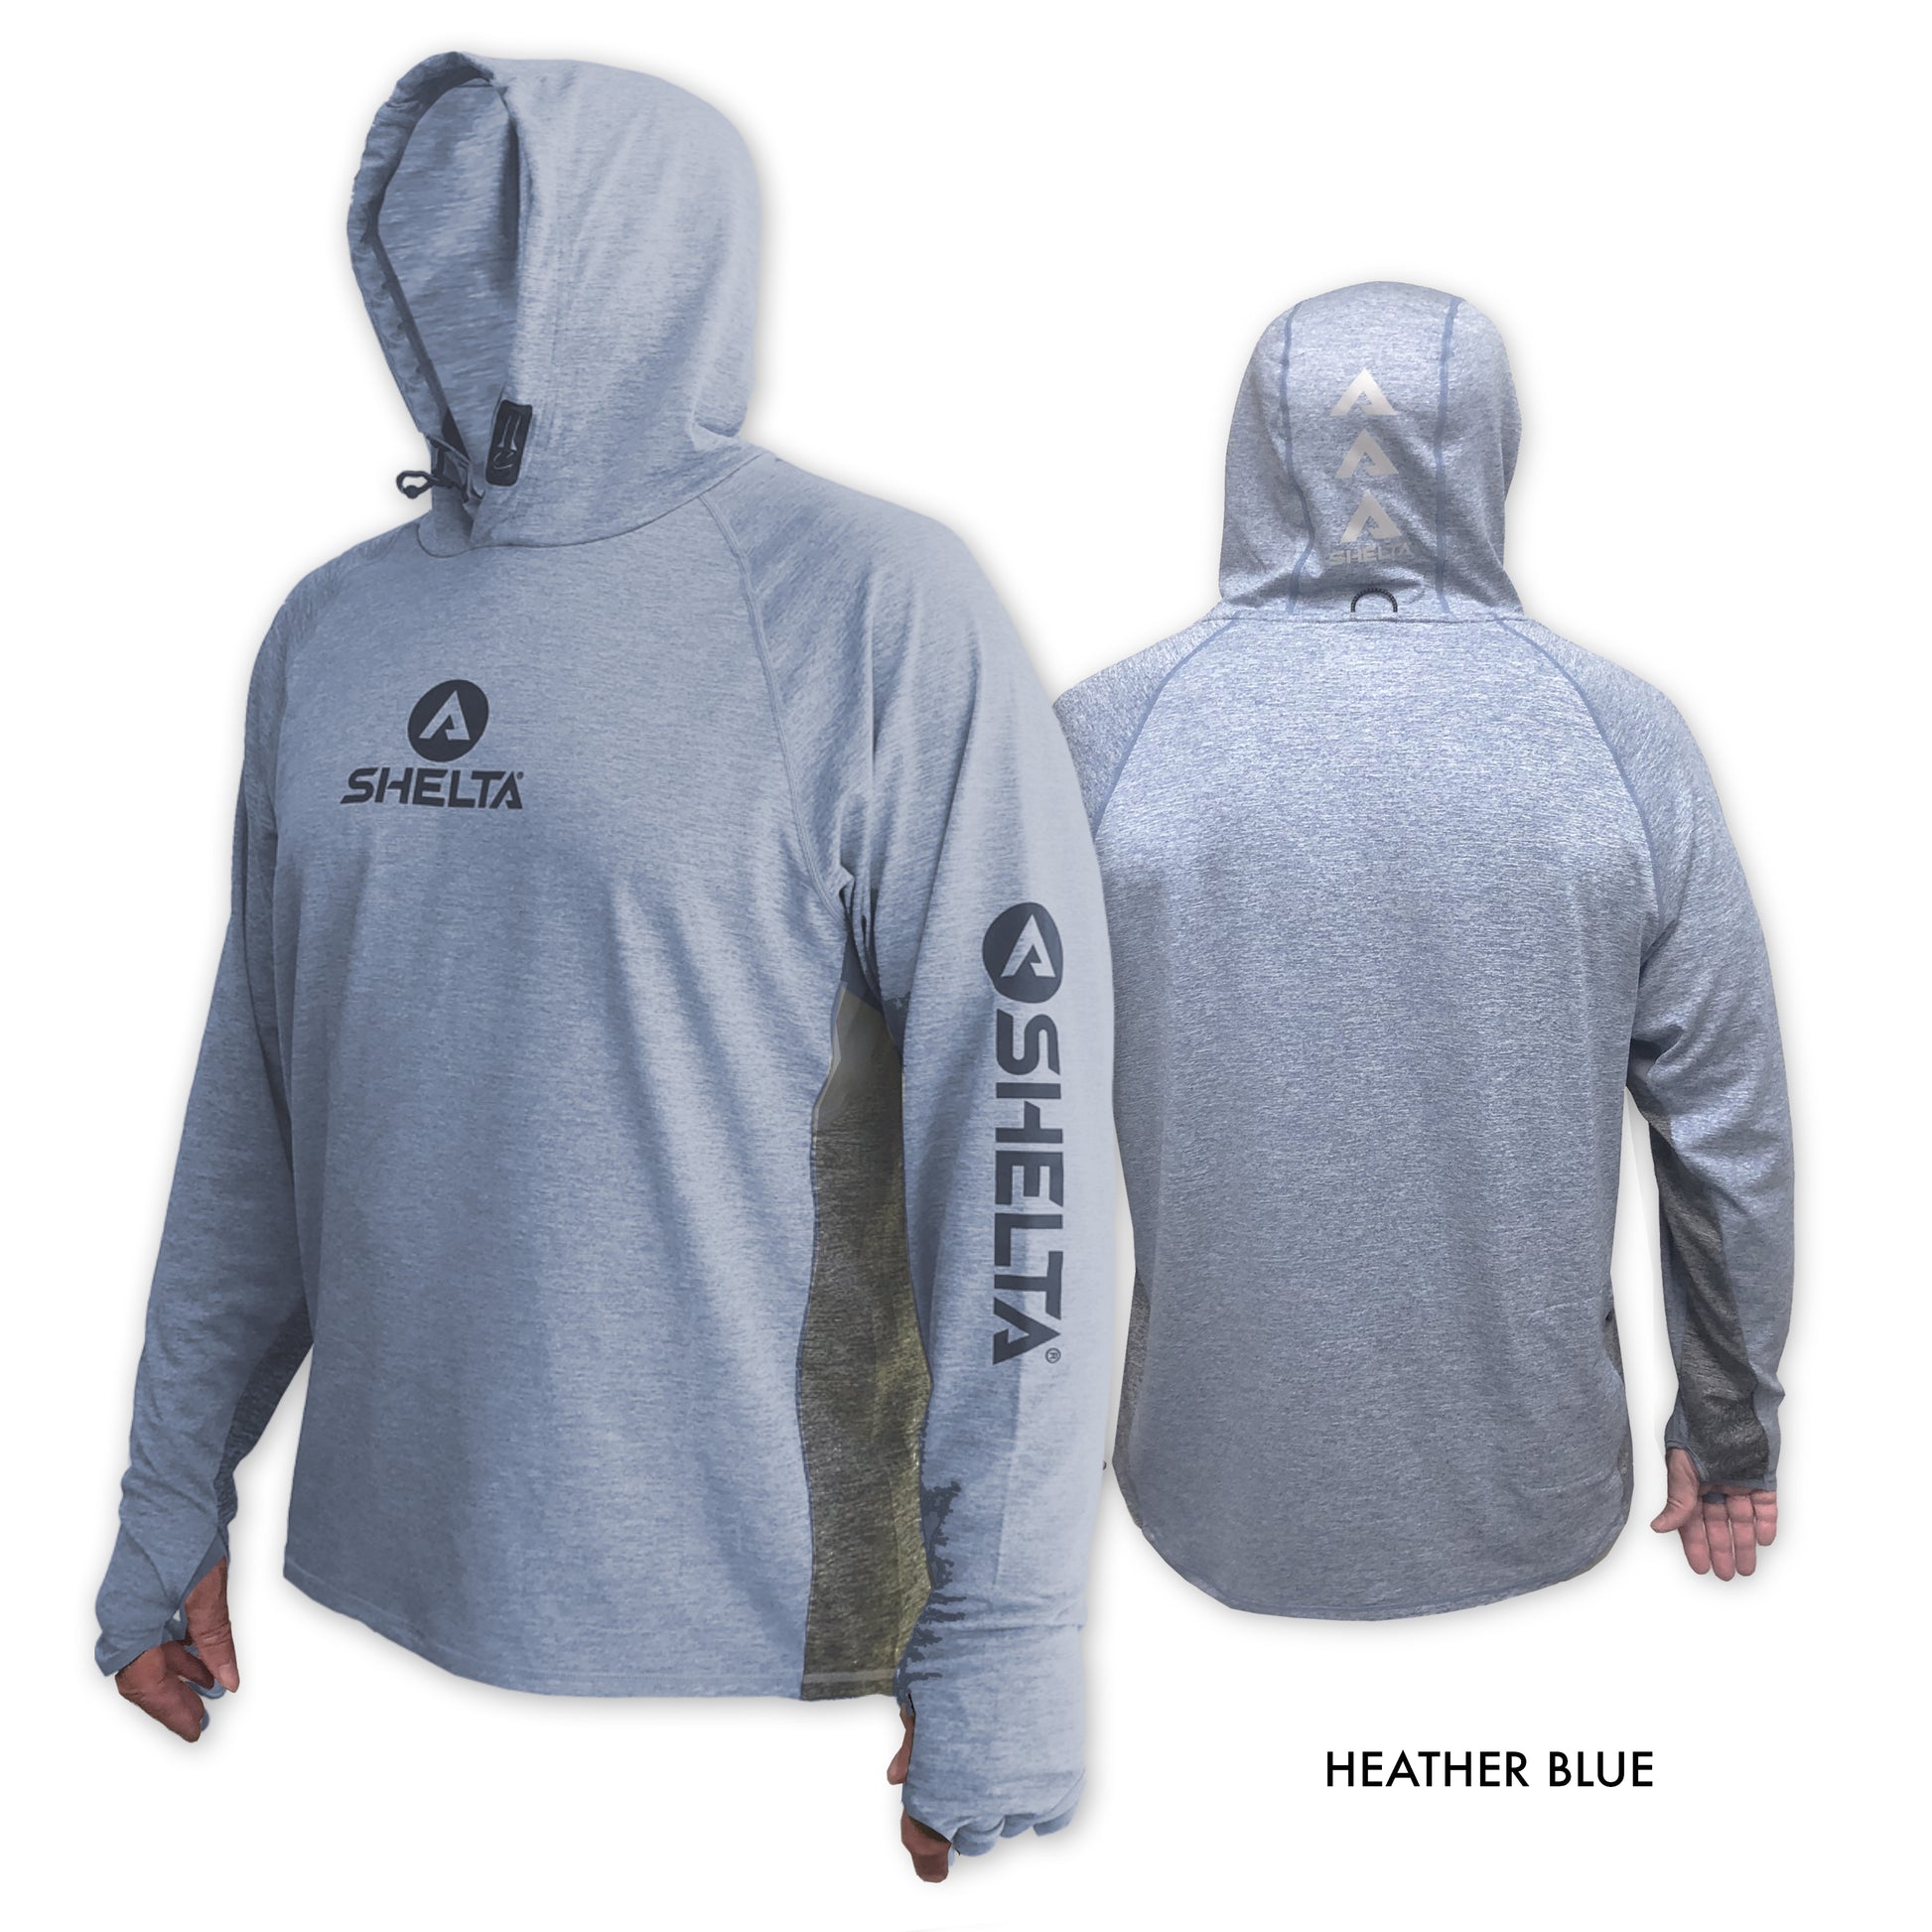 The Assault Hoodie in the Heather Blue Color is engineered & built with sun protection, function, and durability in mind.  Offering features consistent with Shelta core values and innovation goals.   UPF 50+ UV protection, the highest rating given.  Blocks 98% of UVA/UVB radiation Loose comfort fit Moisture Wicking Sleeves with thumb hole & finger loop for multiple hand protection options